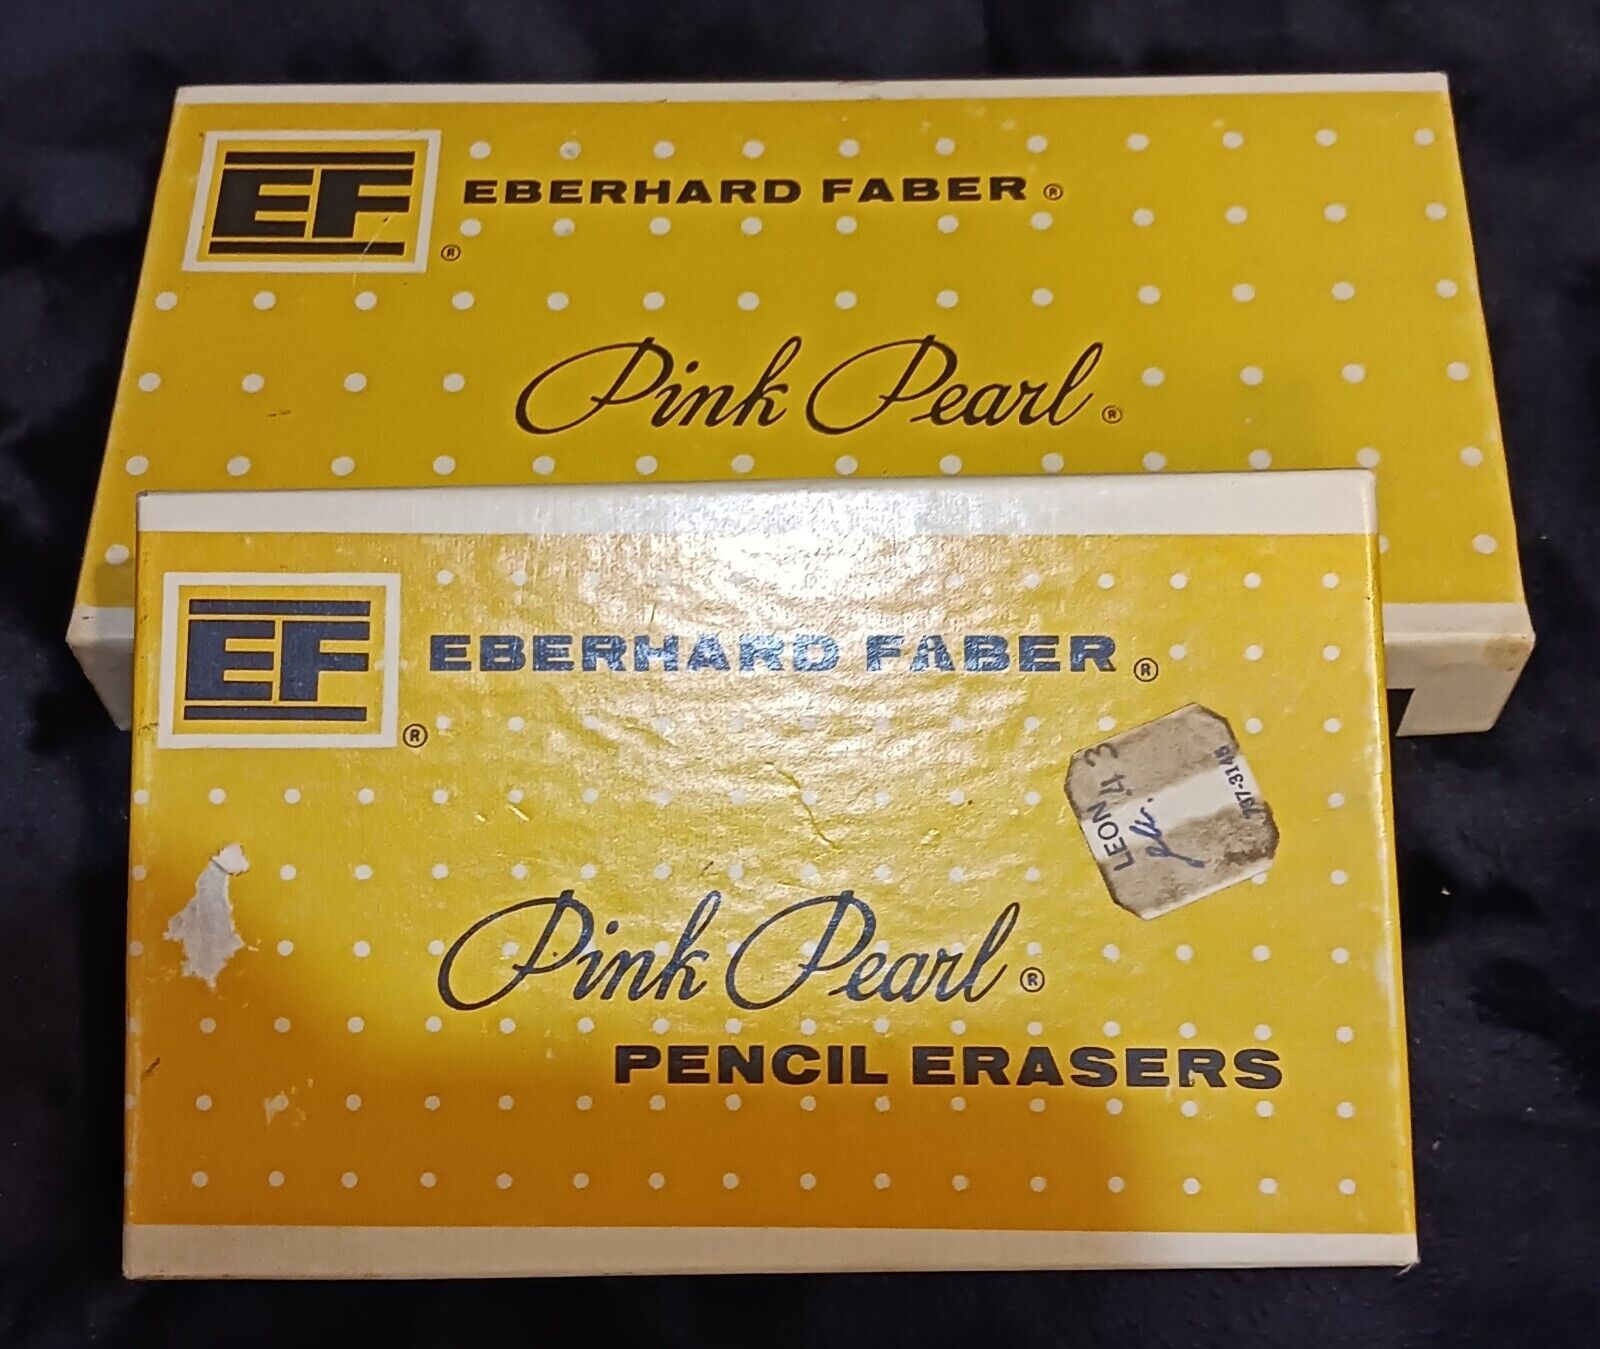 Antique EBERHARD FABER Pink Pearl Artist pencil Eraser Qty 10, 100s Qty 6, 101s